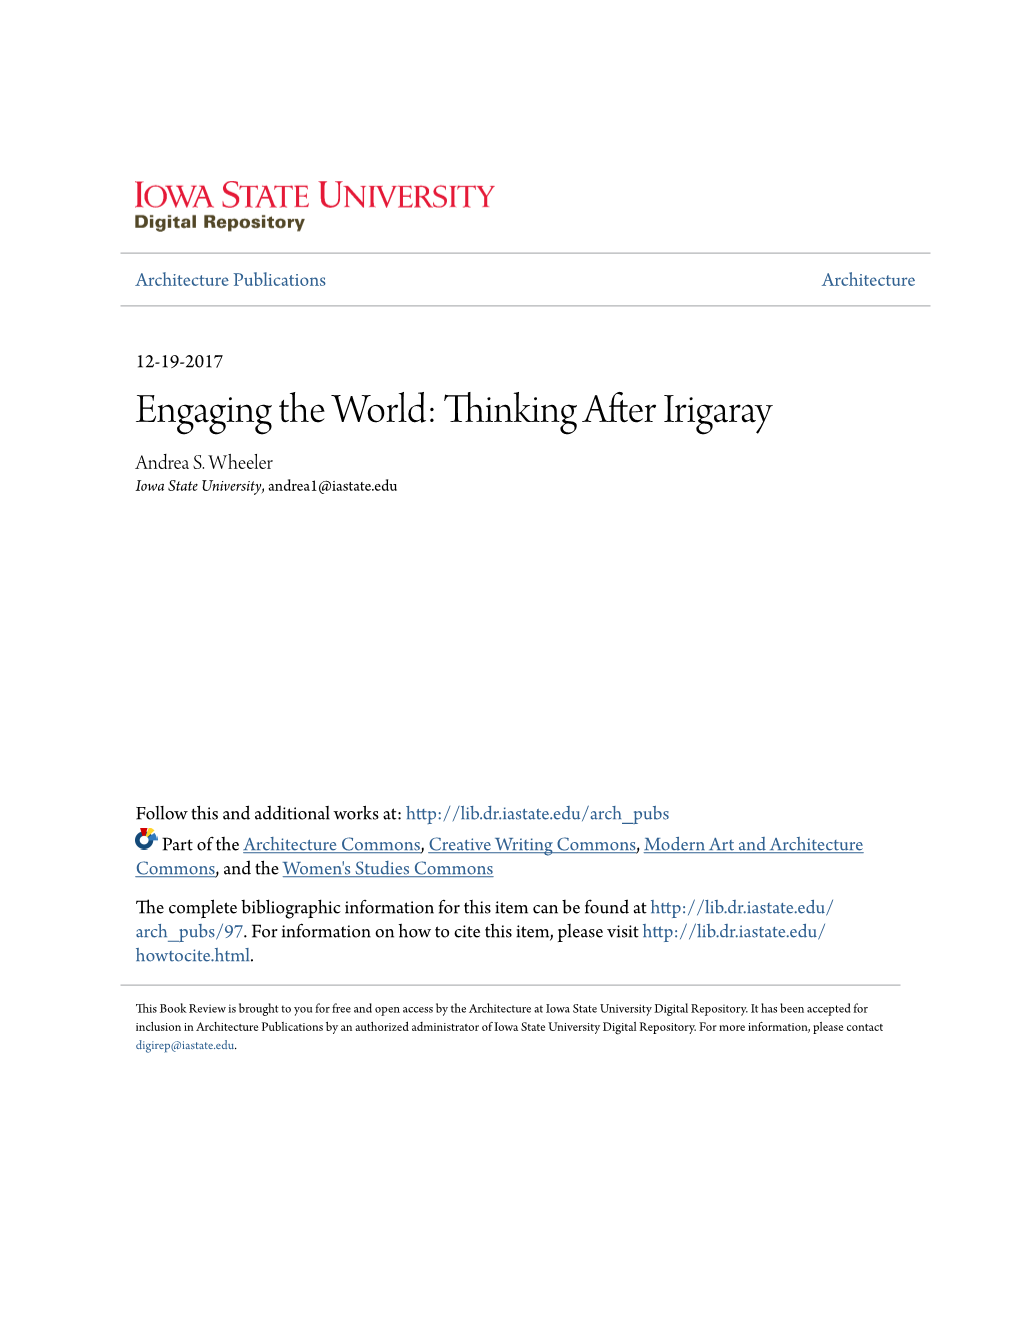 Engaging the World: Thinking After Irigaray Andrea S